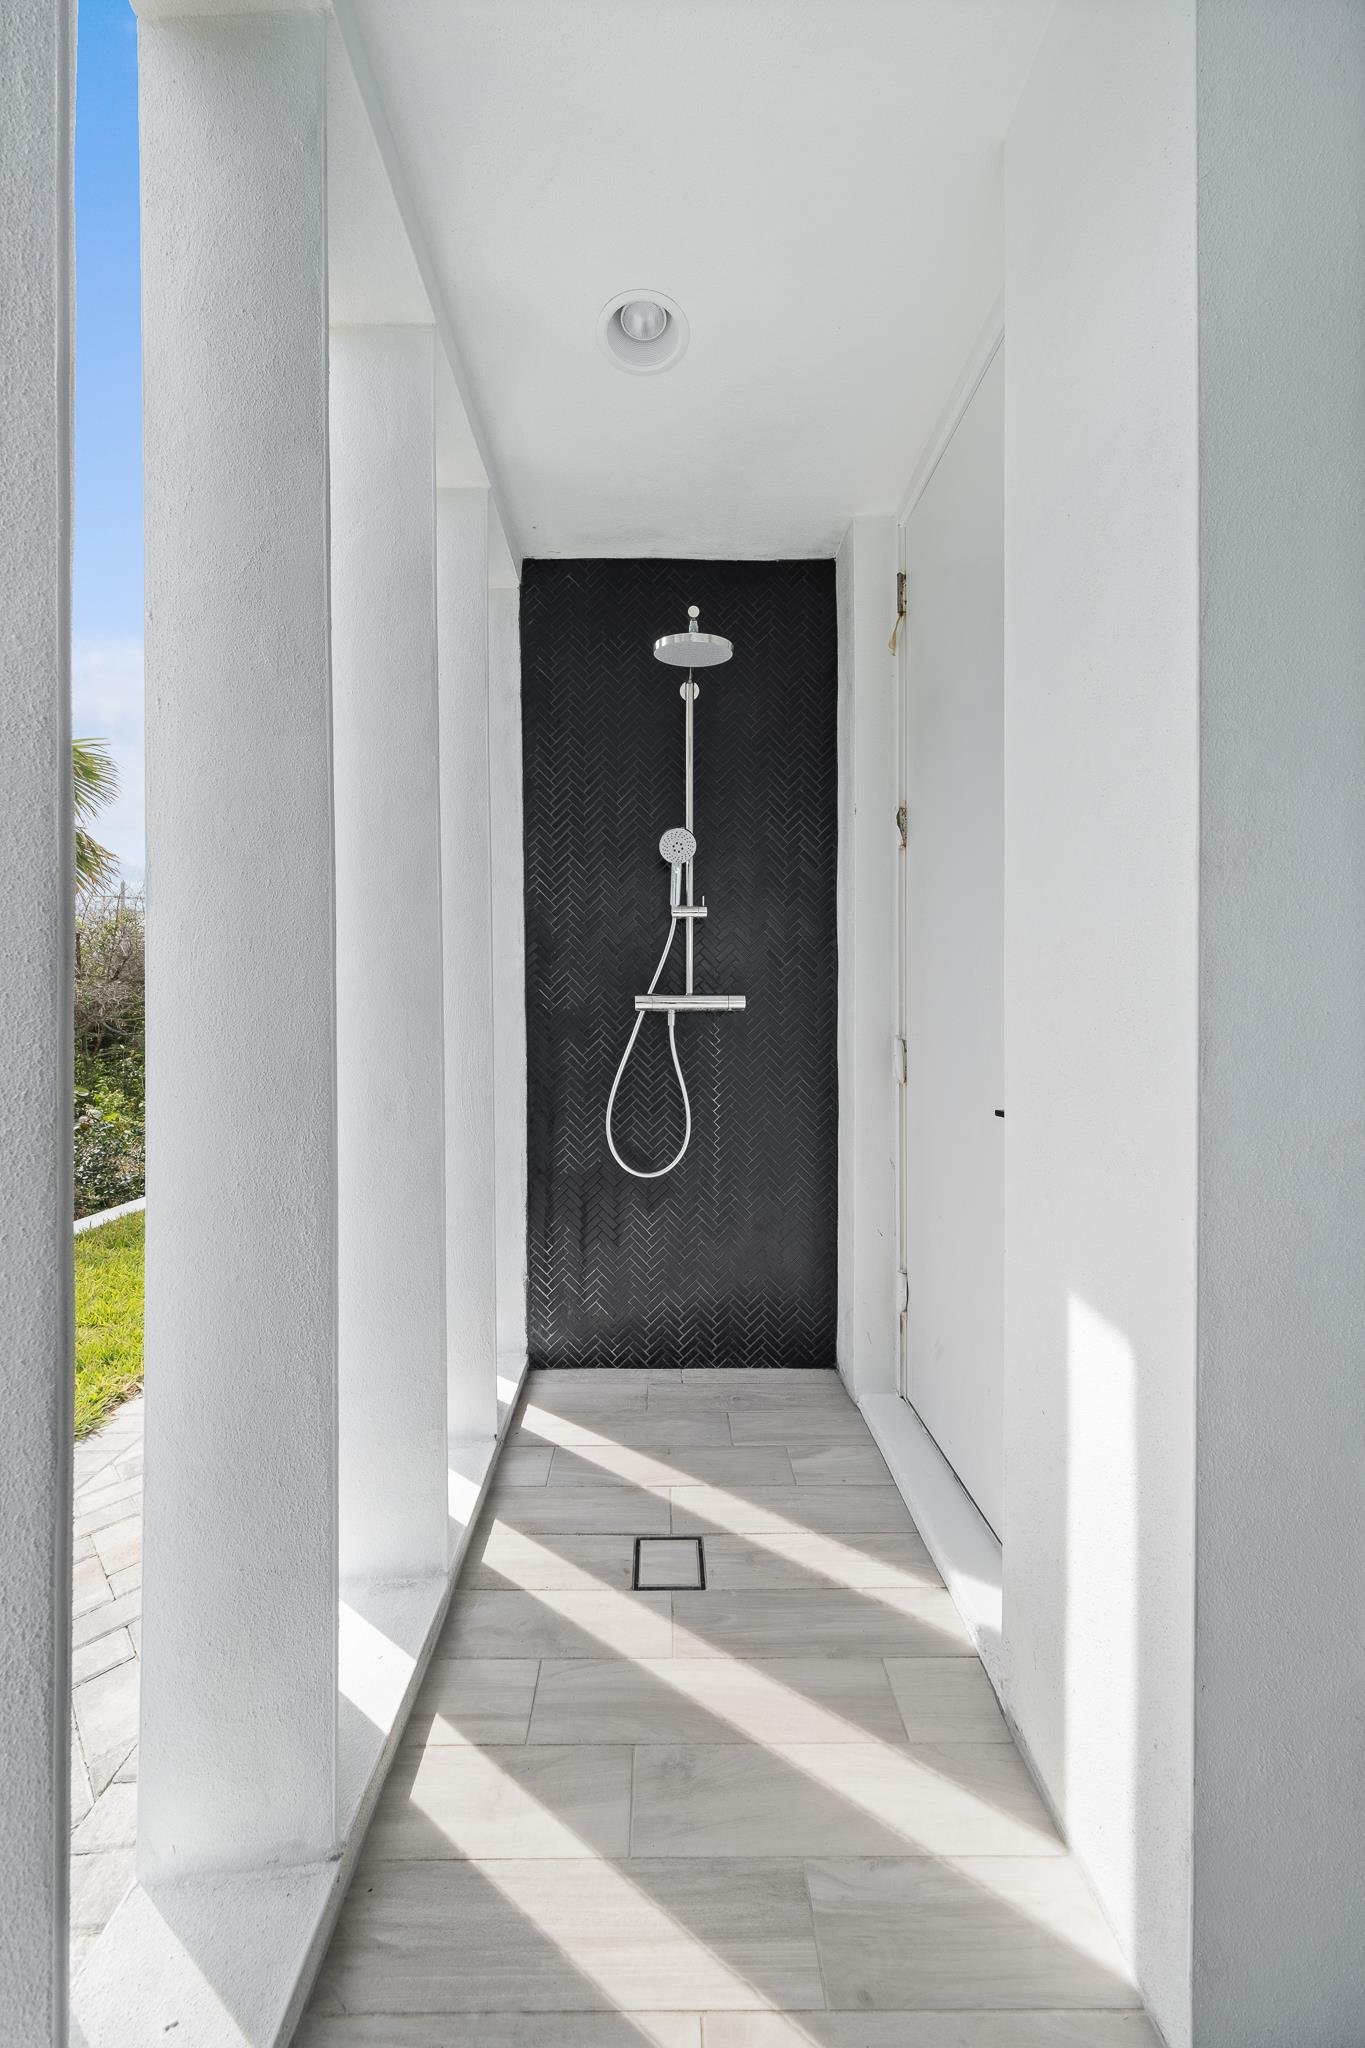 re4a-resolution-4-architecture-modern-apartment-jewel-box-13-exterior-view-outdoor-shower.jpg